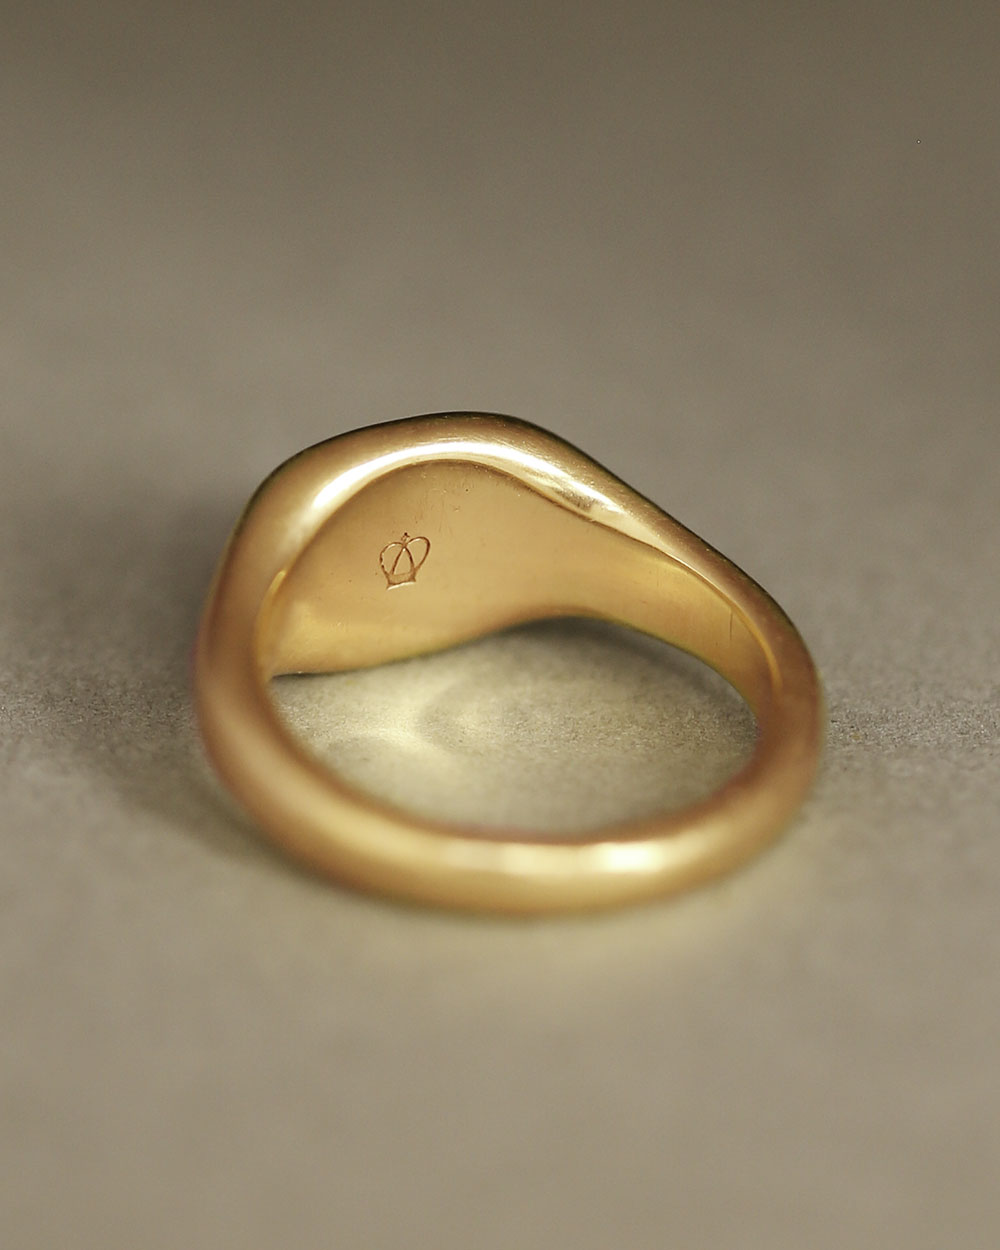 Solid 18k yellow gold heavy signet ring on gray paper. Hugo Signet Ring by George Rings.